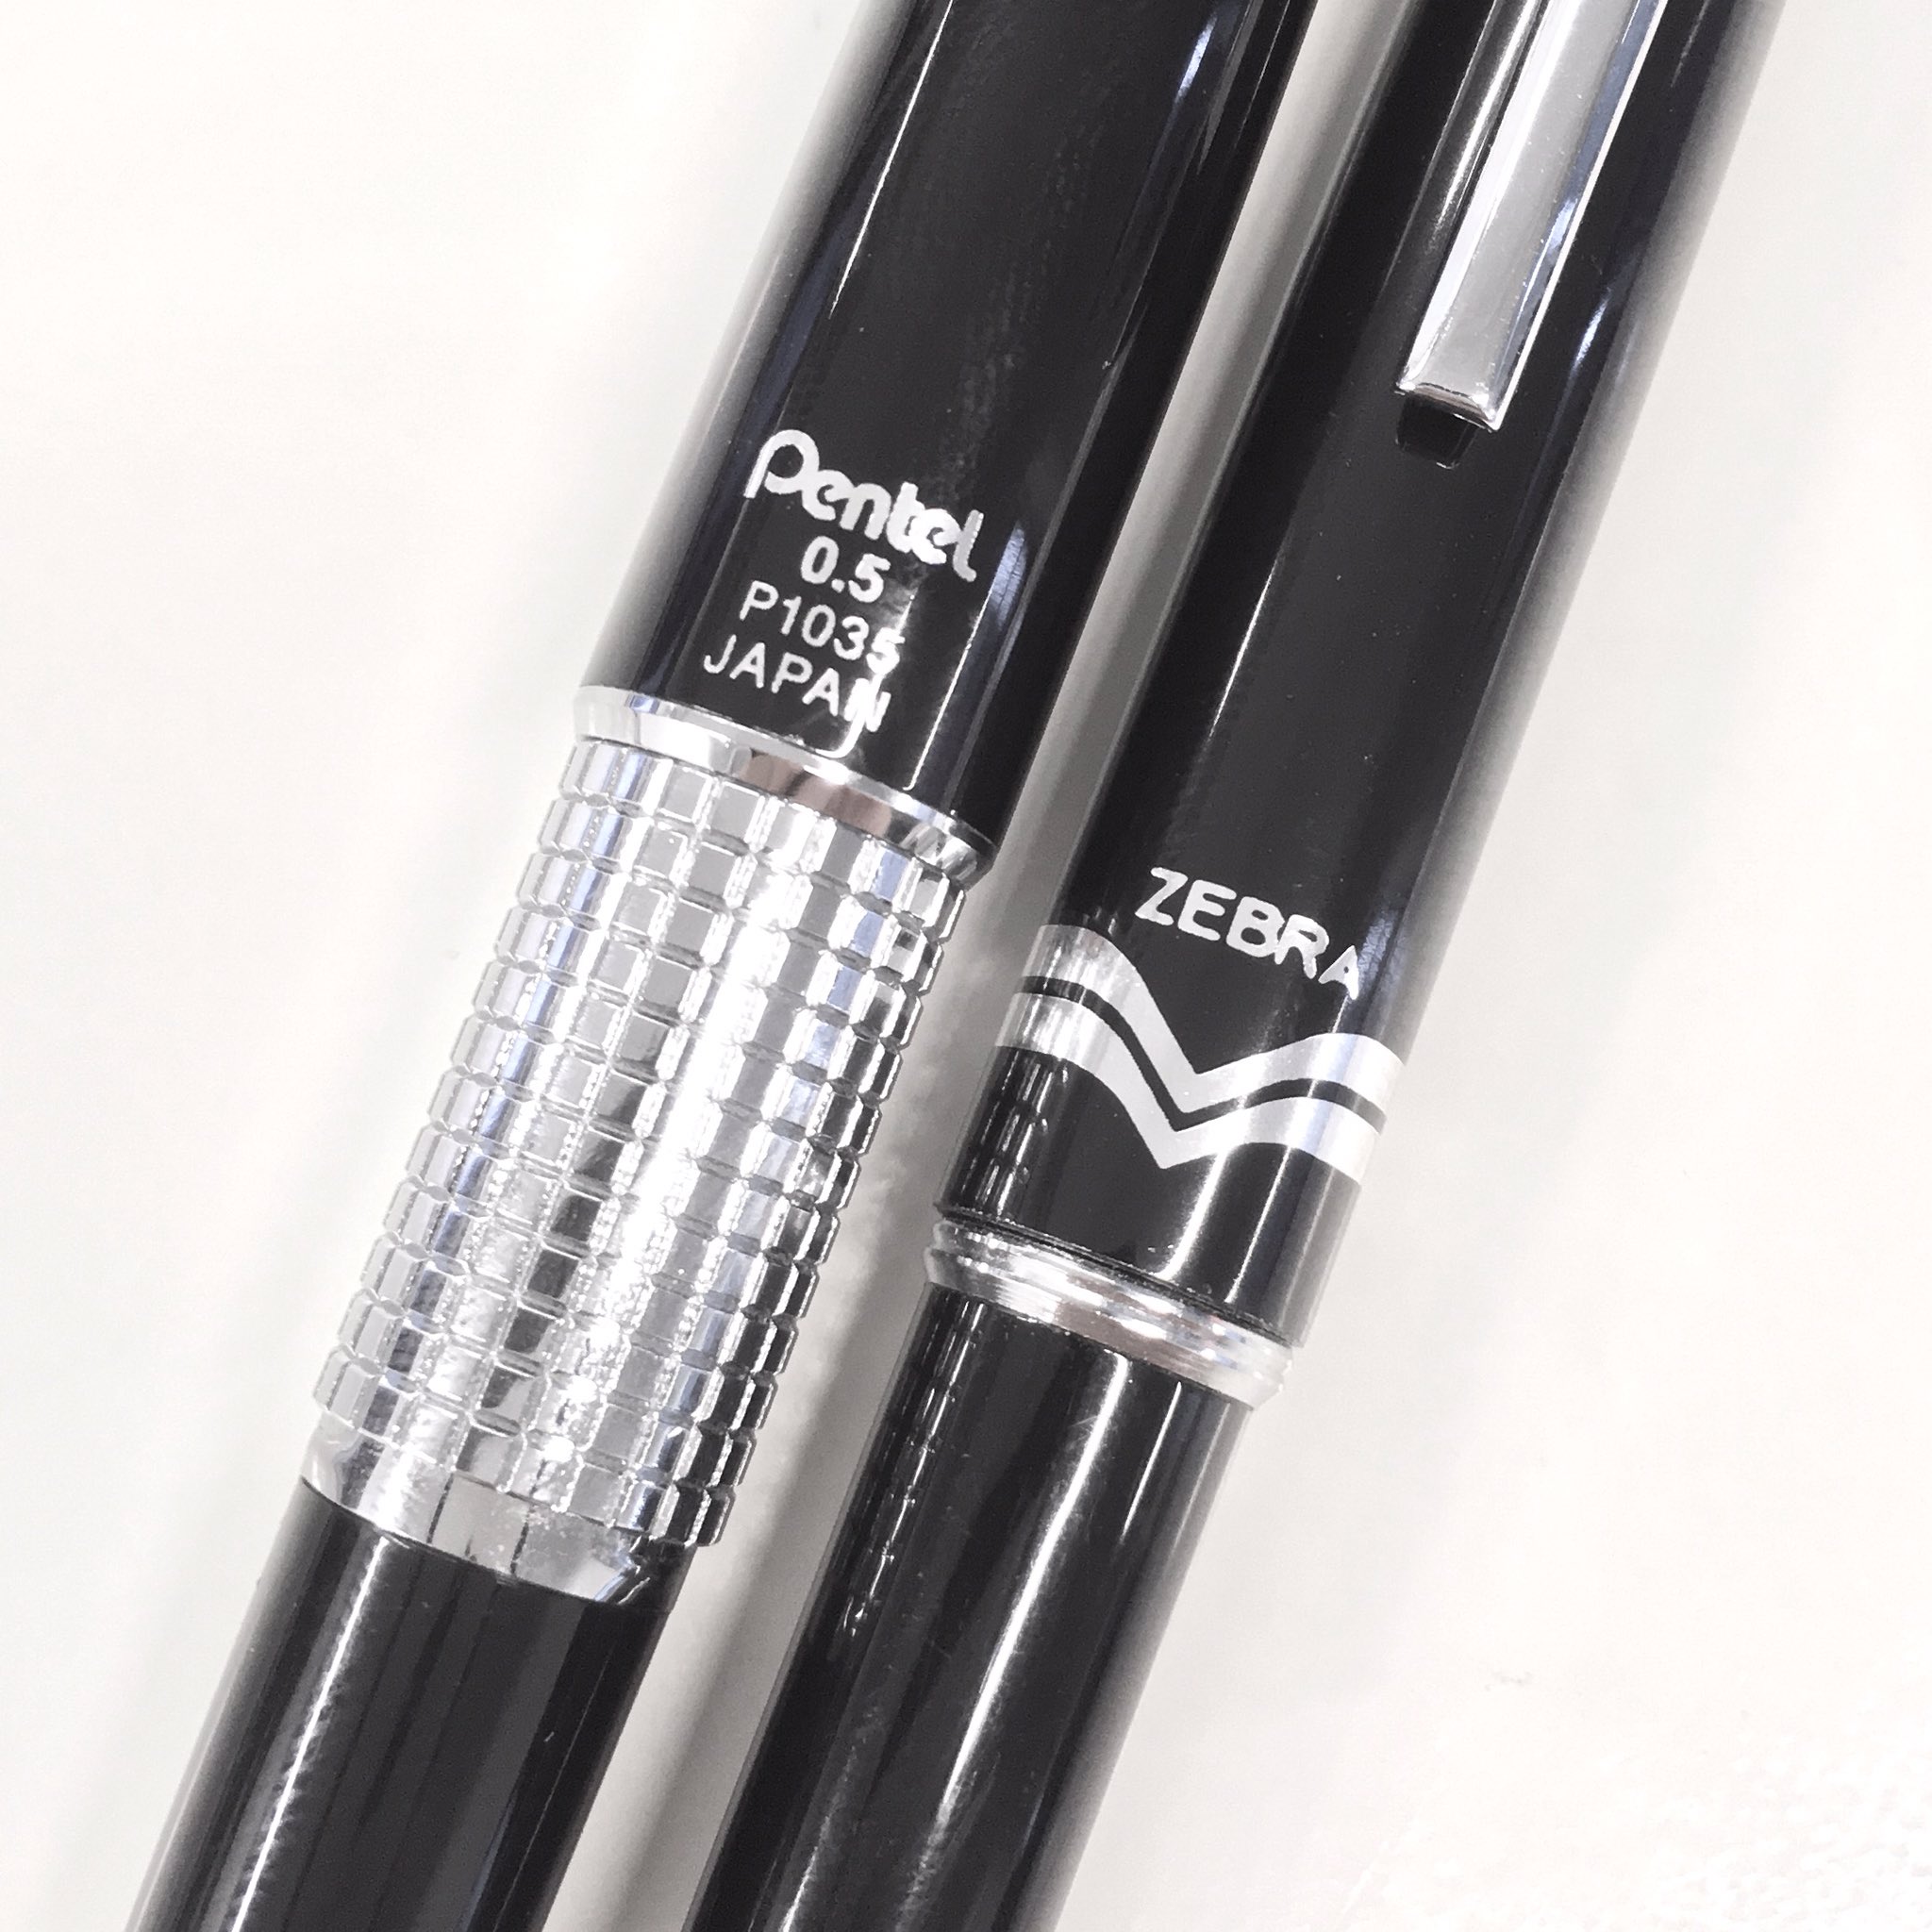 Kelvin Pang This Vintage Zebra Pocket Ballpoint Is Shorter Than Pentel Kerry When Capped But The Same Length When Posted Thewritematch シャーペン 万年cil T Co Uvrclobcow Twitter